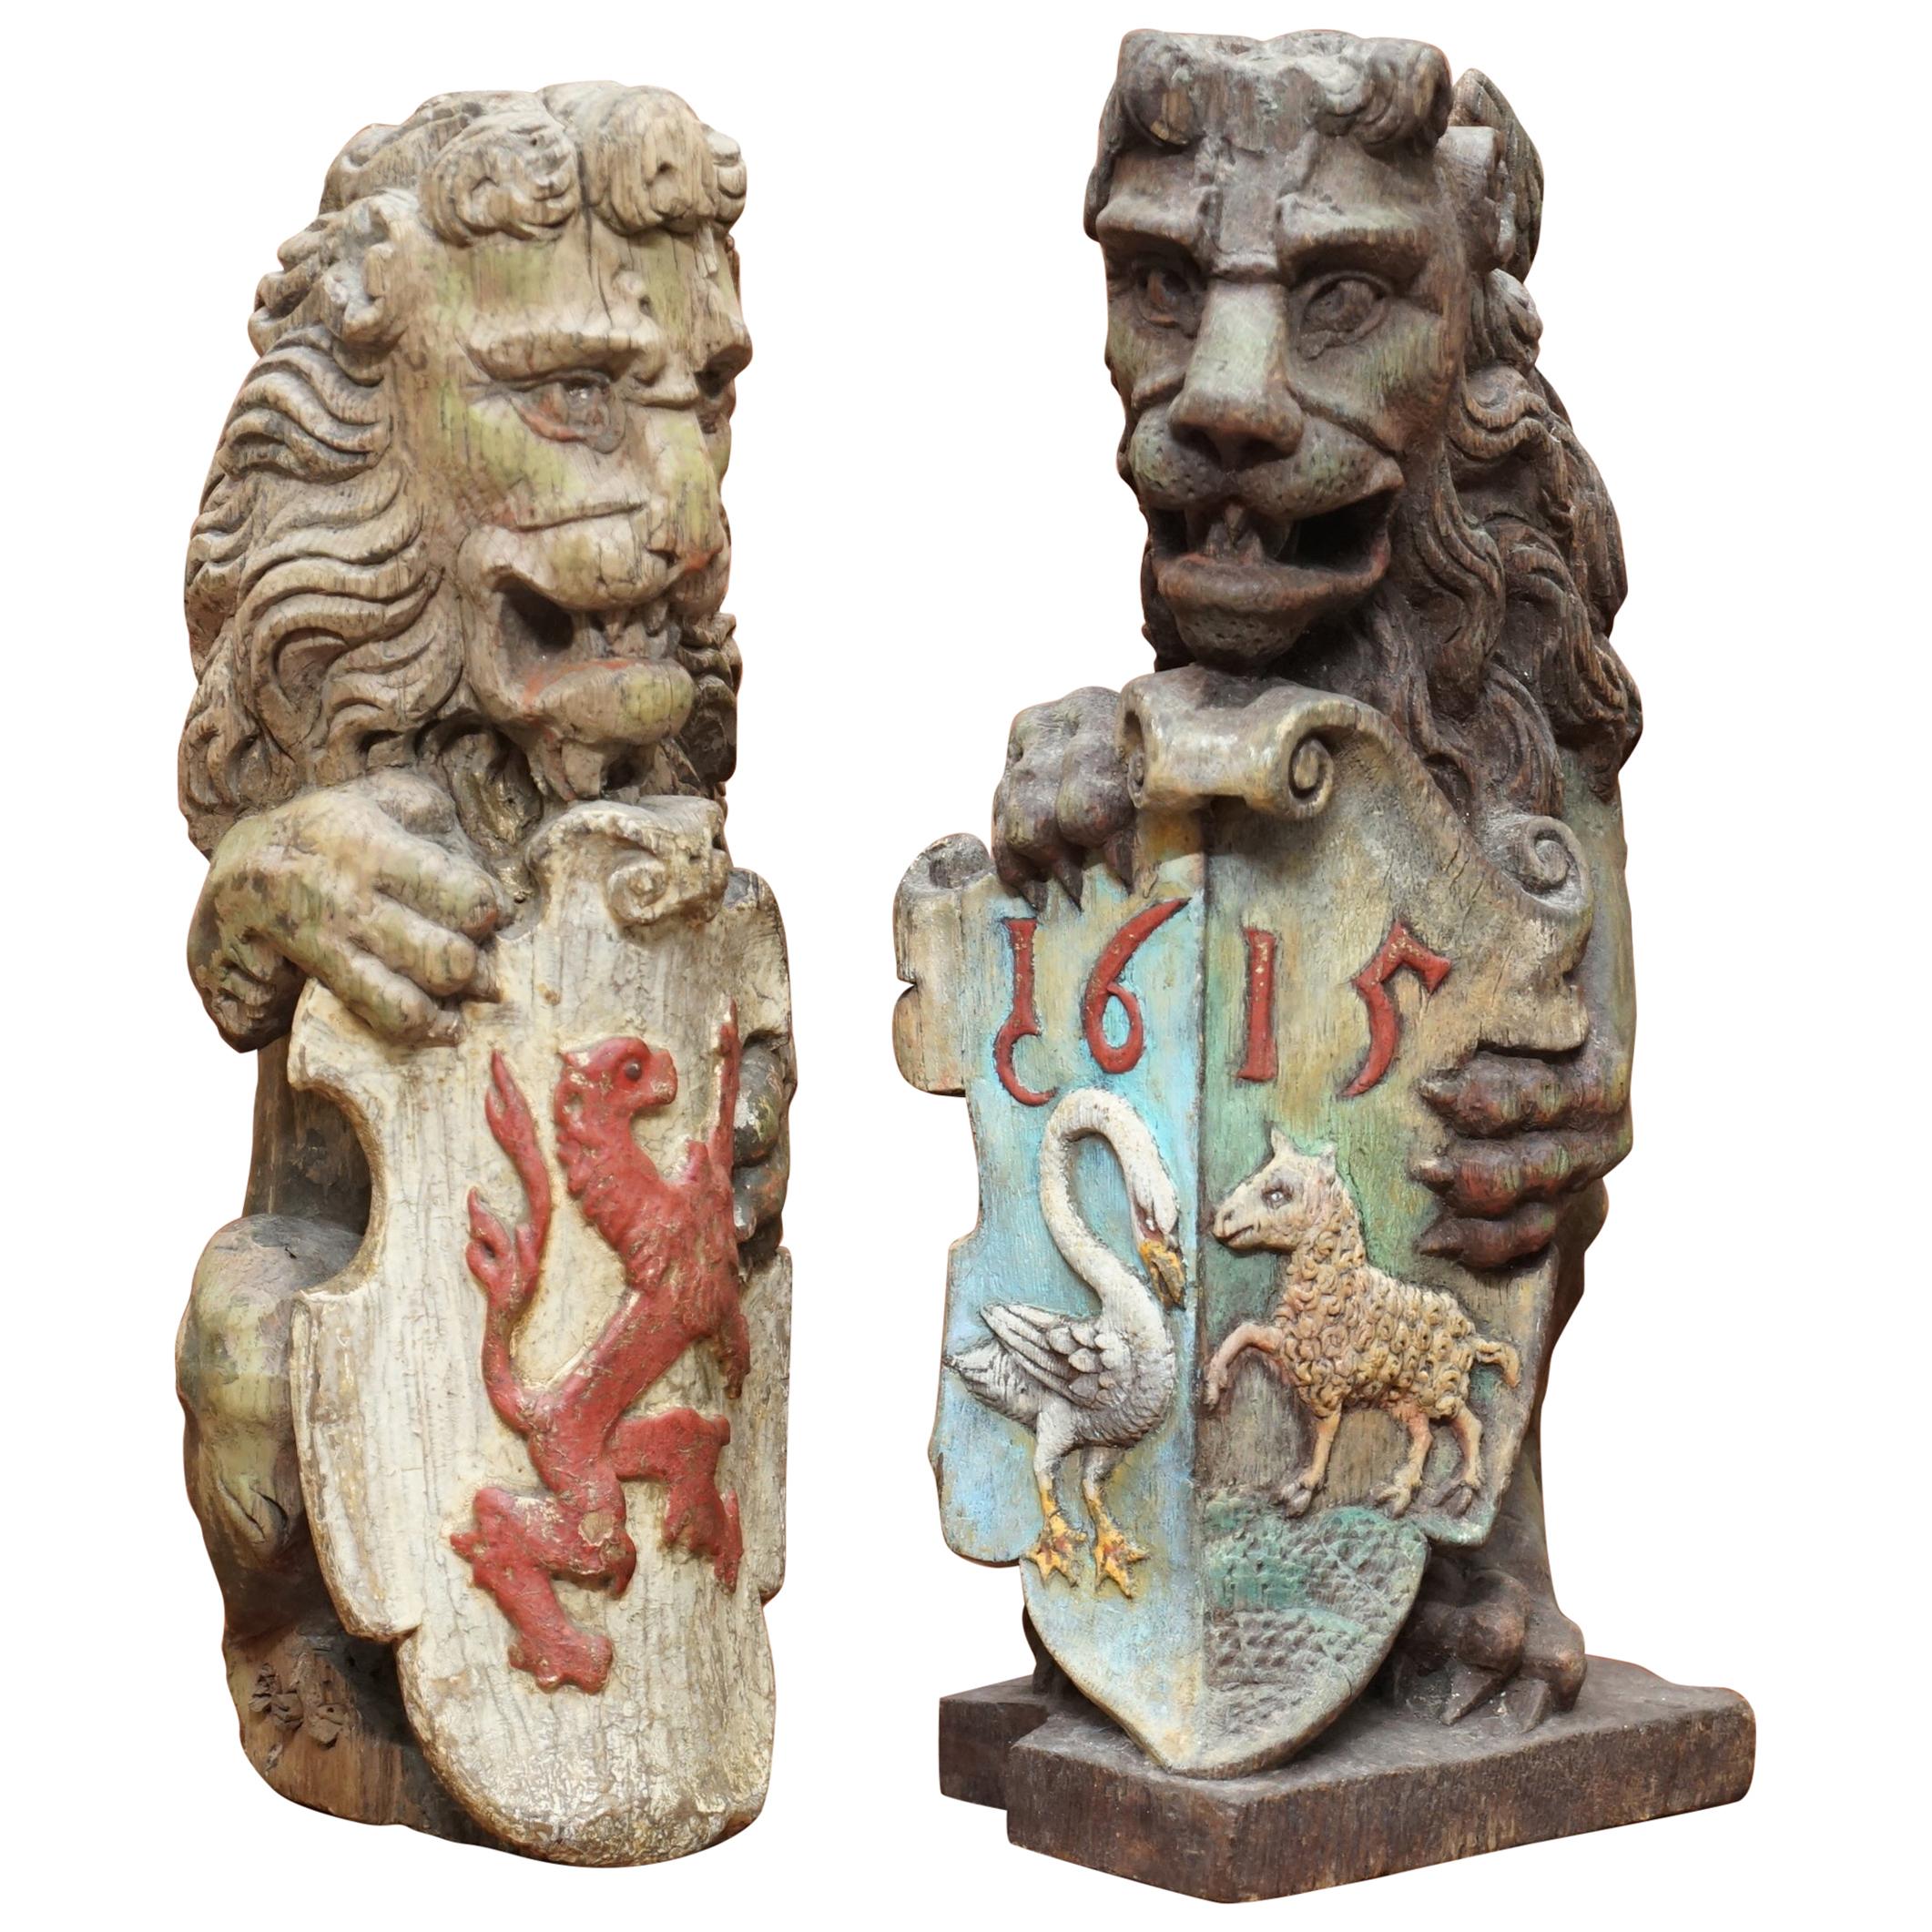 Pair of 1615 English Polychrome Painted Heraldic Lion Newel Banisters Finials For Sale